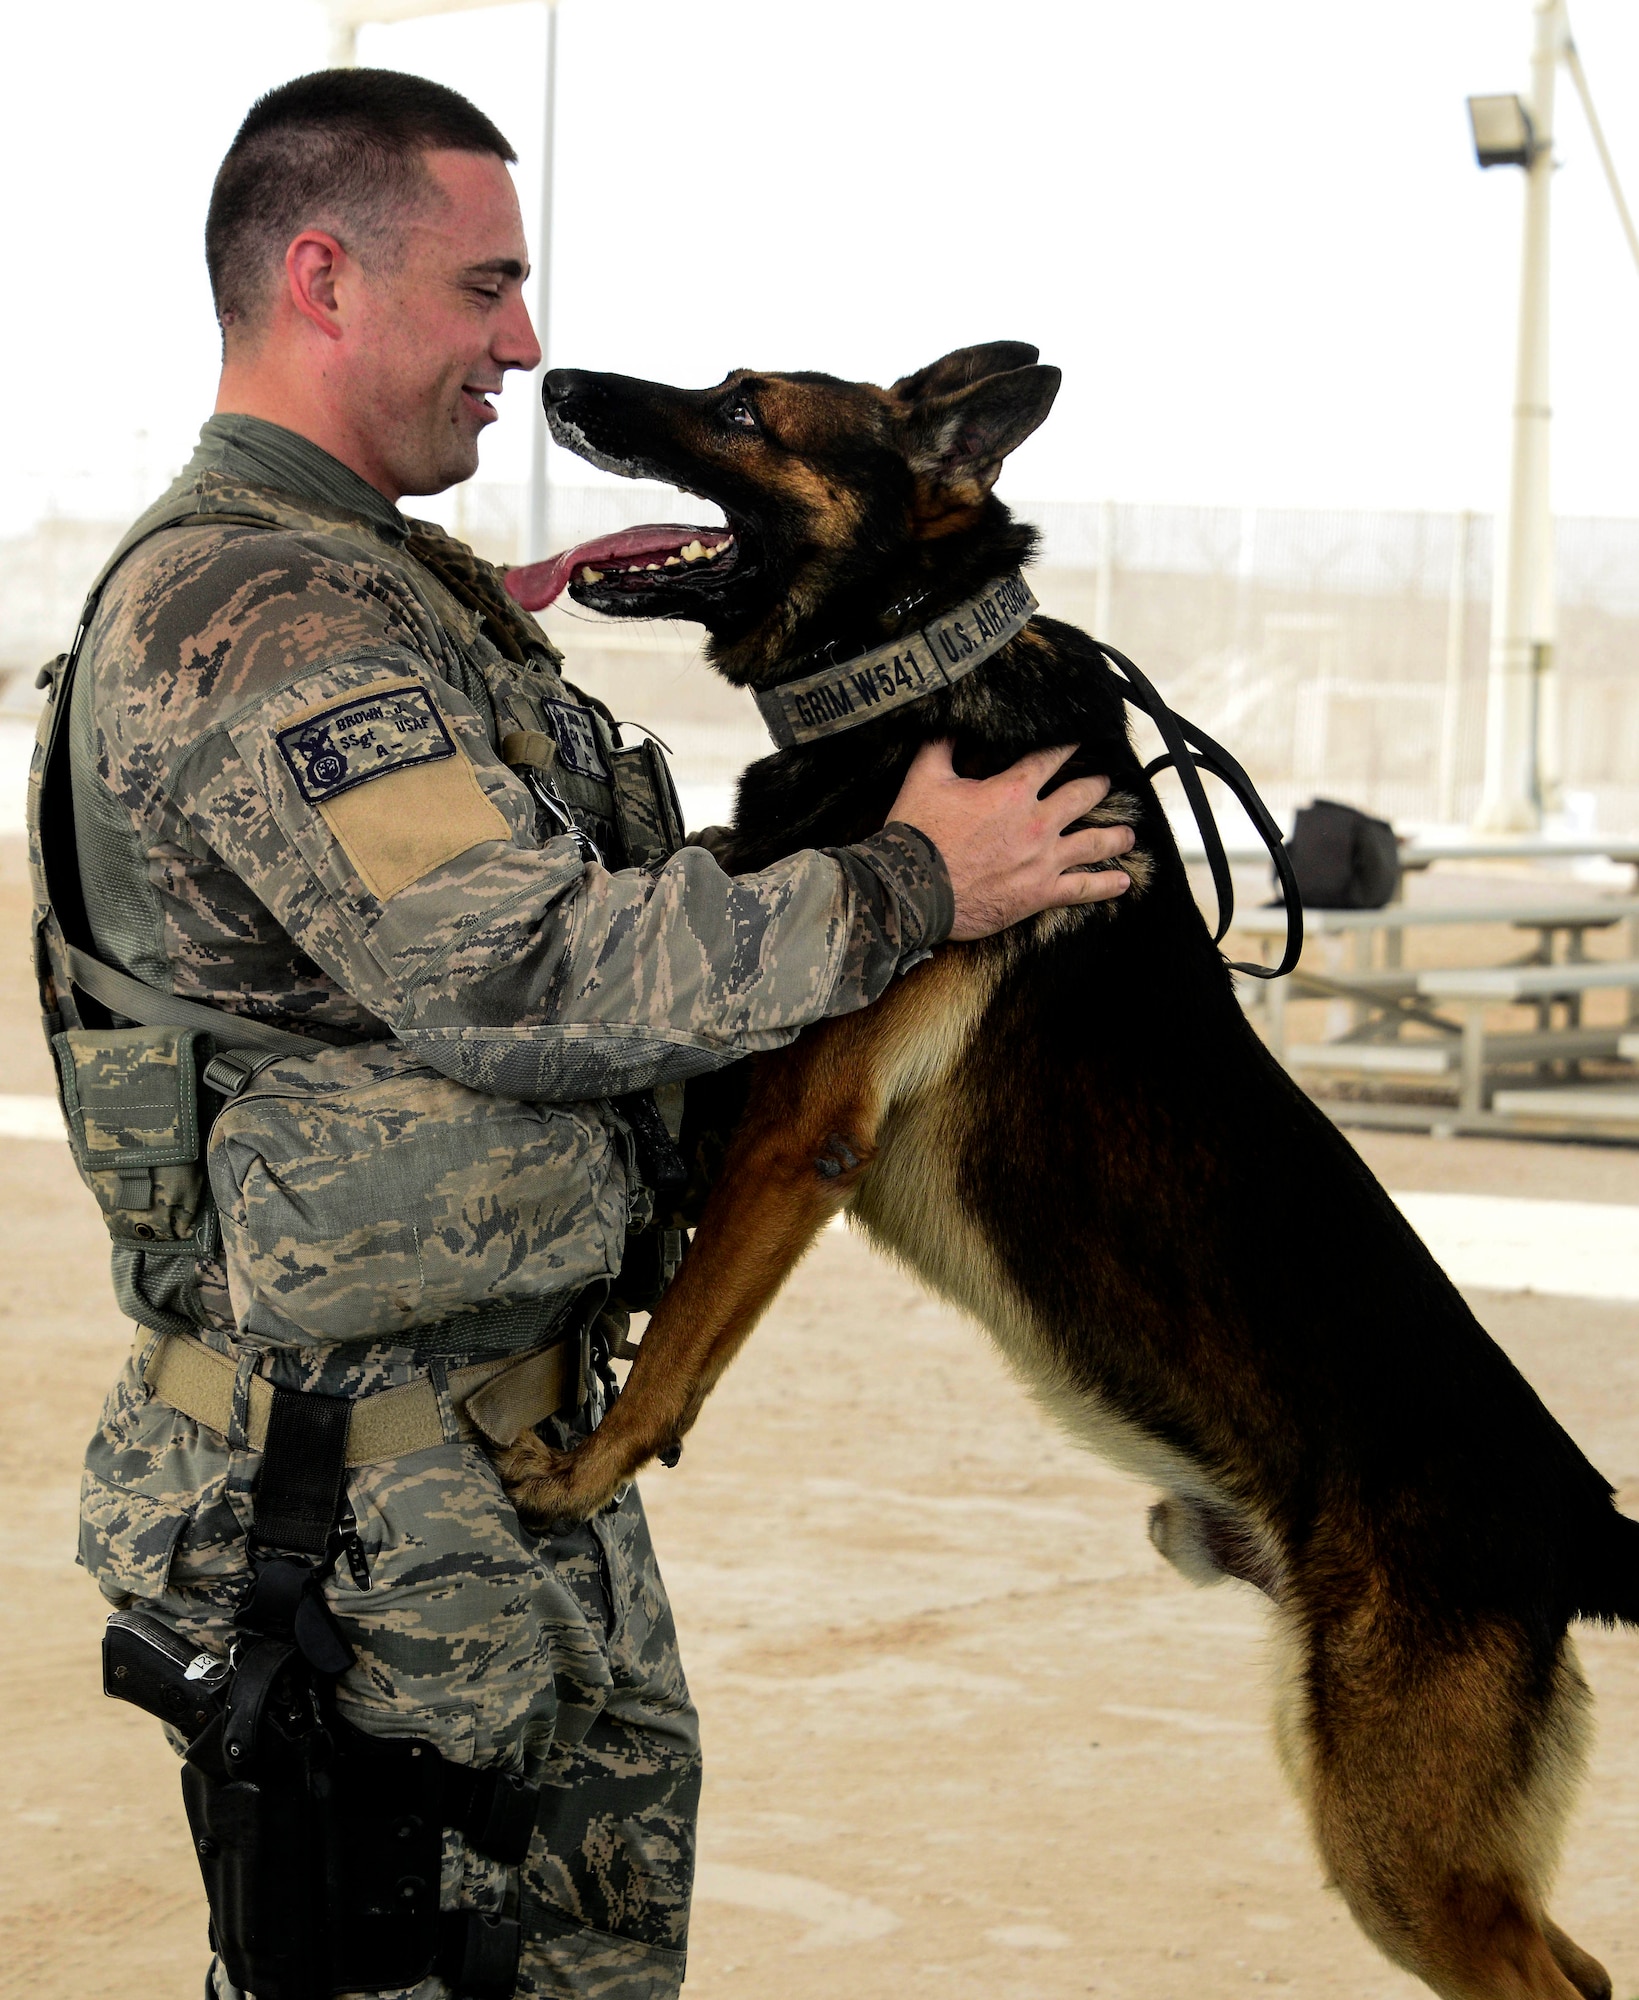 Staff Sgt. Jacob Brown, 379th Expeditionary Security Forces Squadron military working dog handler, plays with his dog, Grim, after completing a training scenario Sept. 16, 2016, at Al Udeid Air Base, Qatar. MWDs and their handlers work throughout the region to support detection and deterrence efforts. (U.S. Air Force photo/Senior Airman Janelle Patiño/Released)